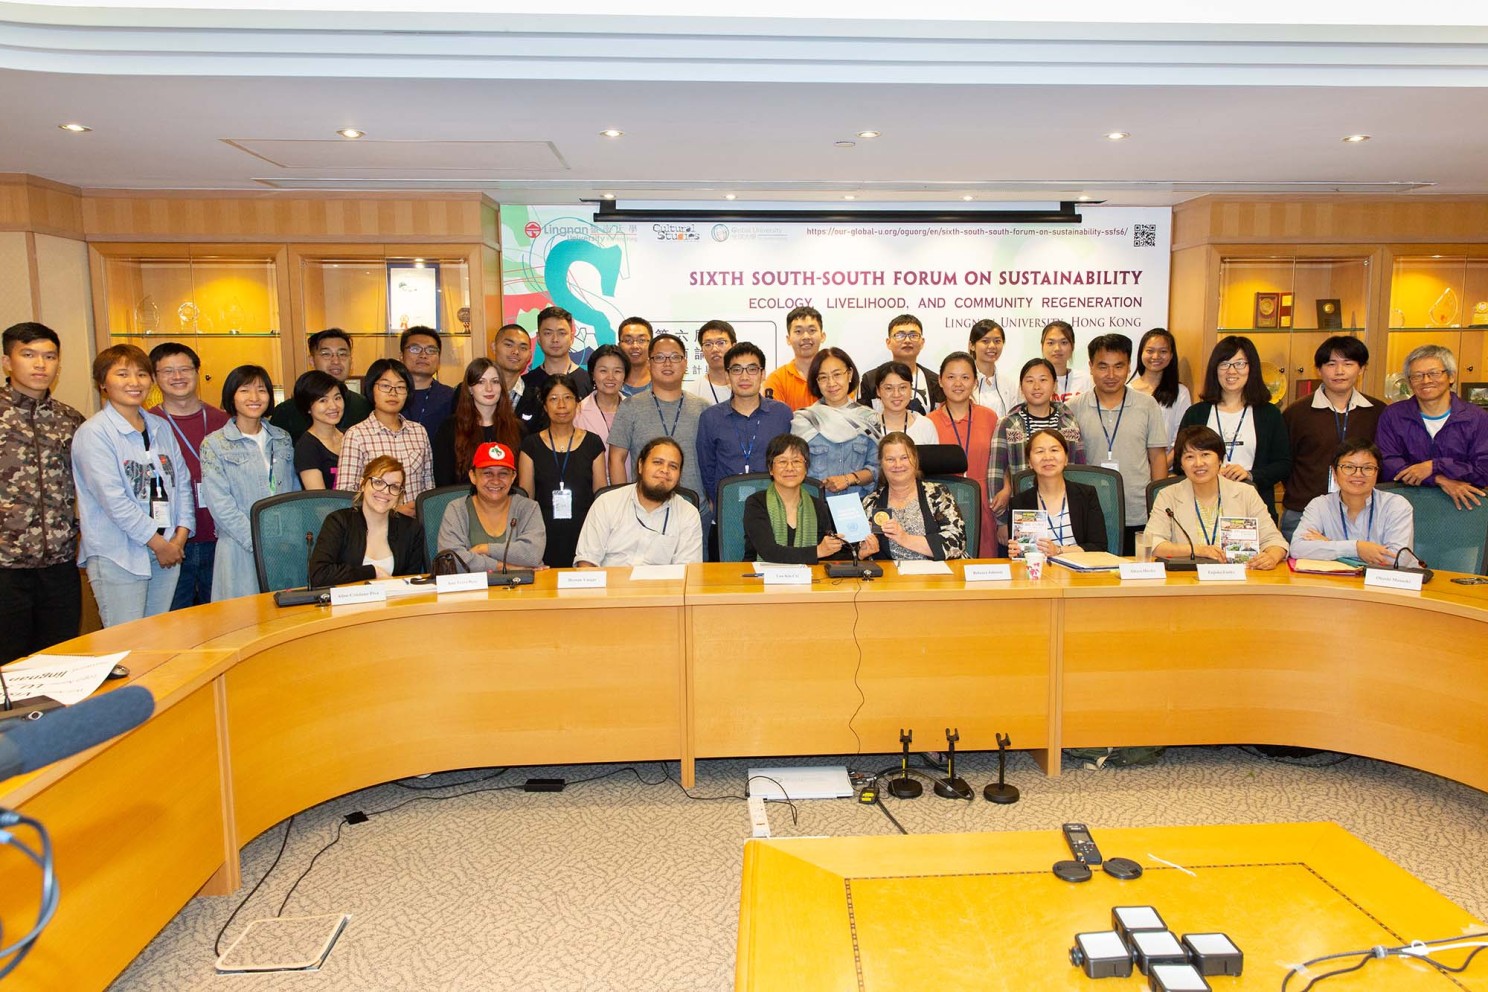 The sixth South-South Forum on Sustainability attracts over 100 local and international scholars and experts to attend